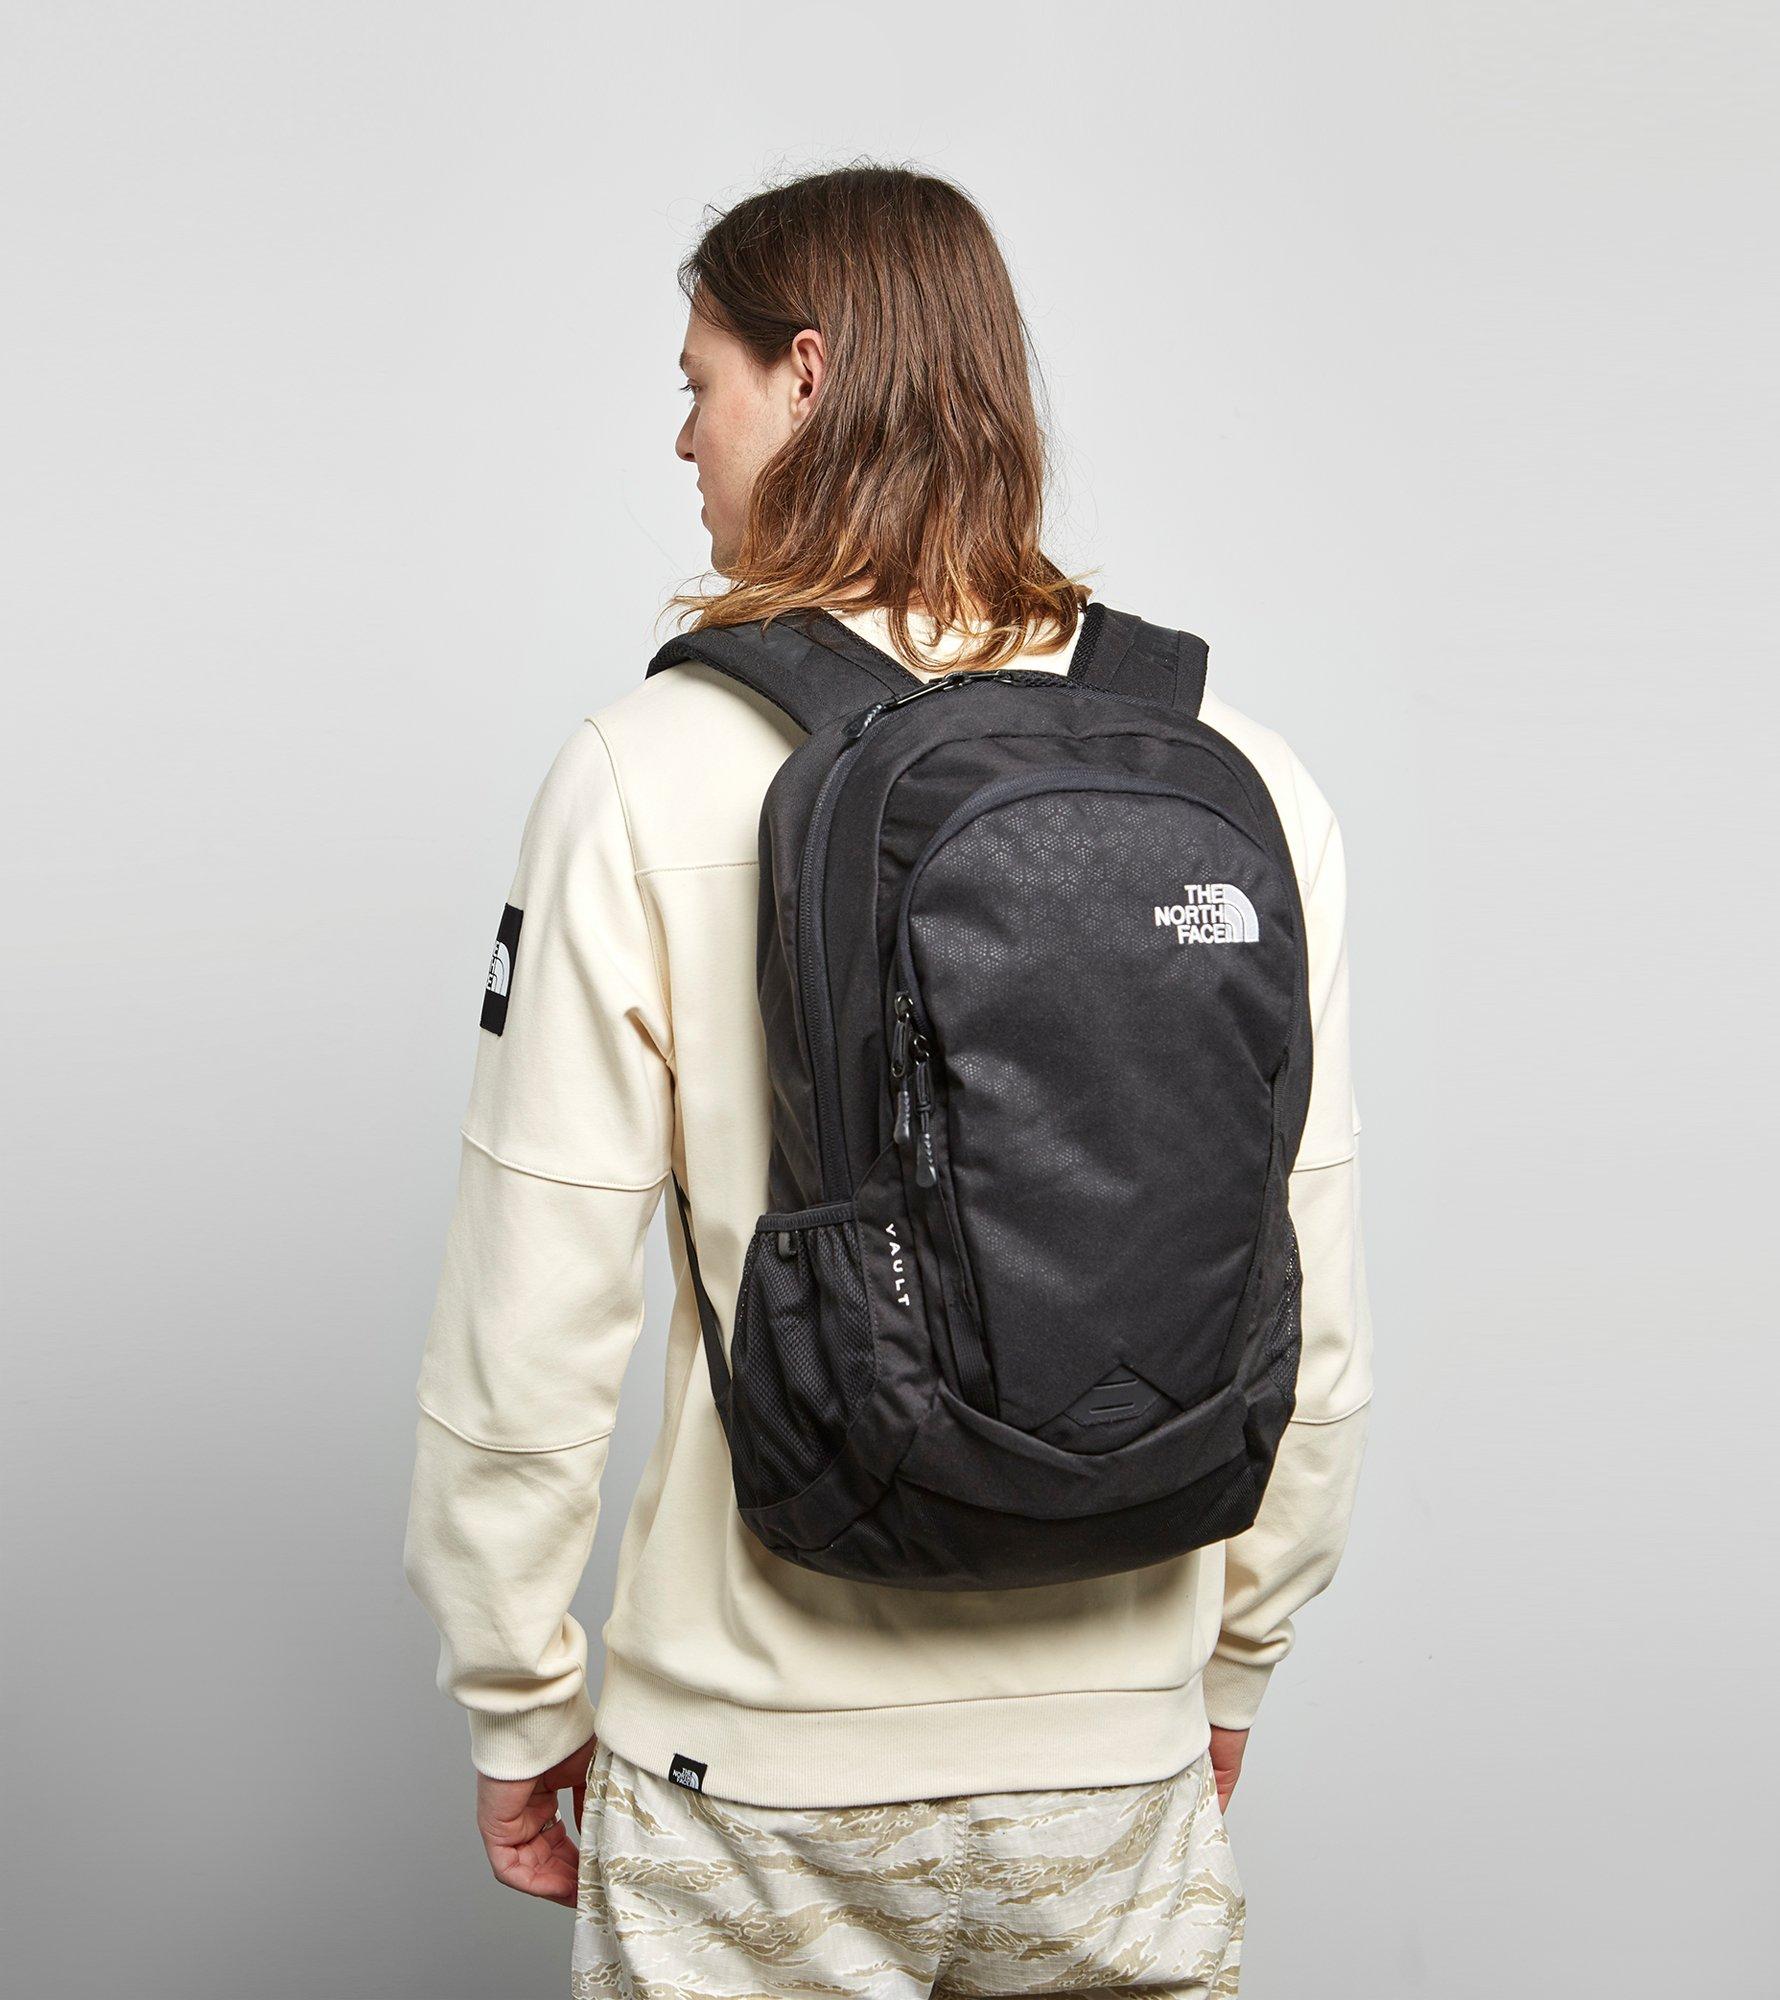 the north face vault daypack 28l